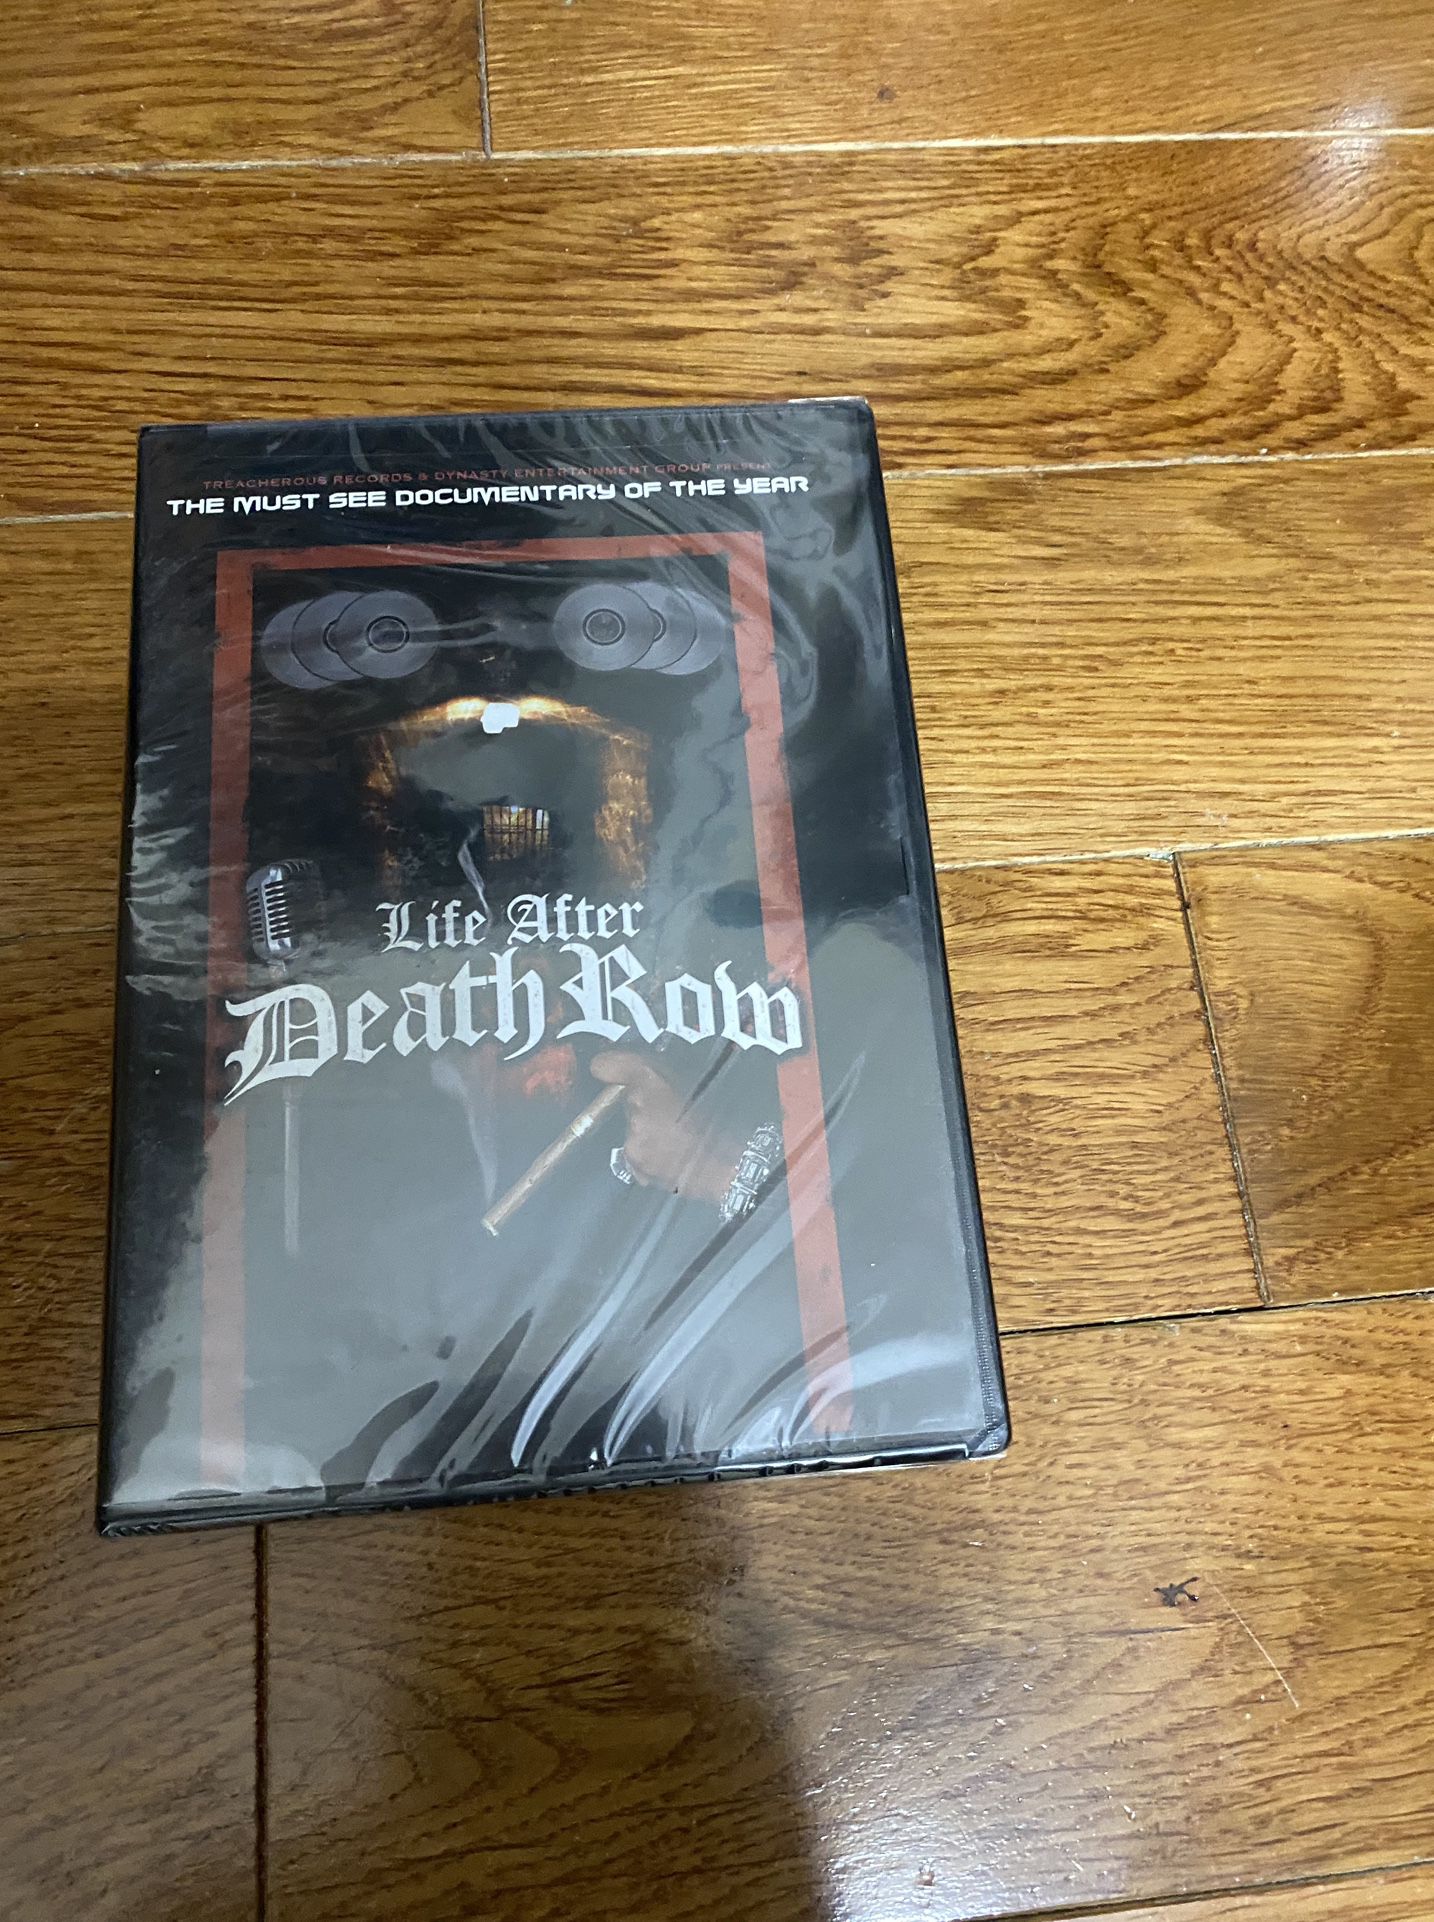 Life After Death Row (DVD, 2006) Suge Knight New